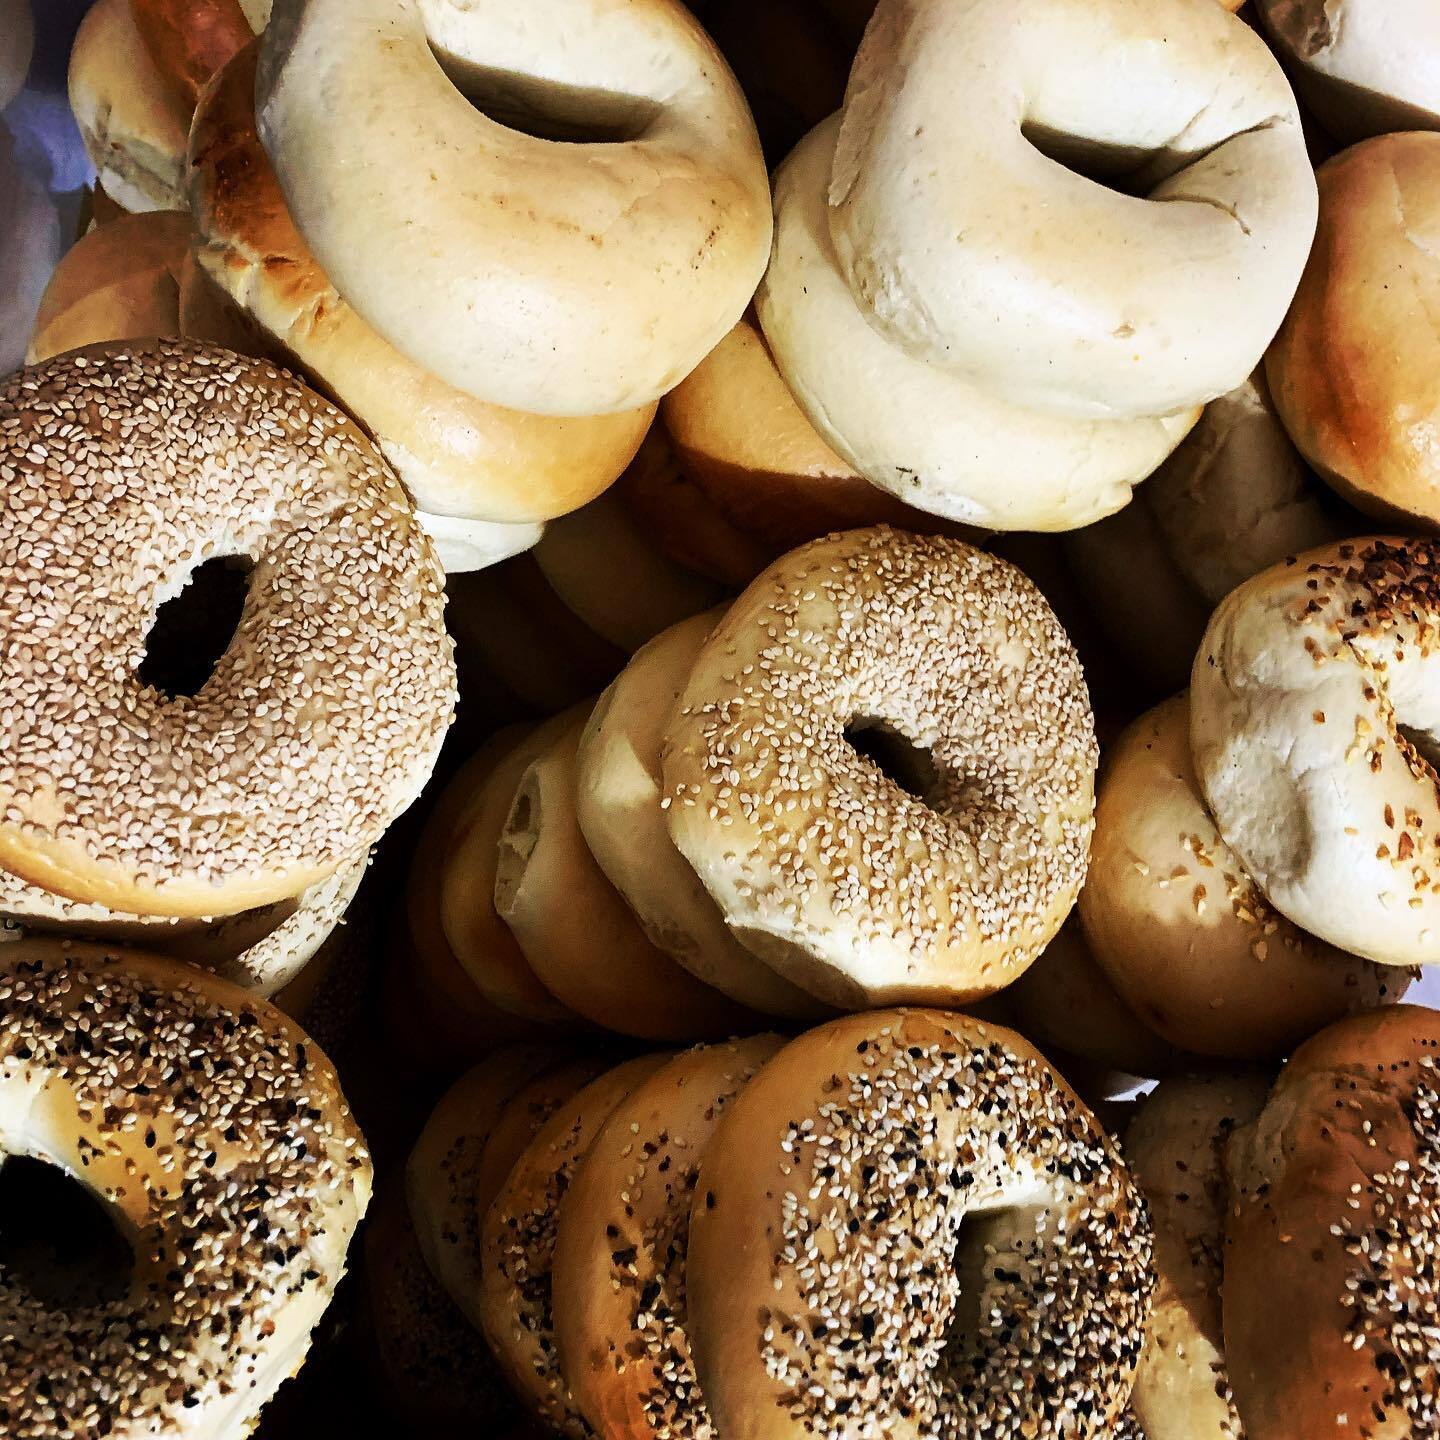 An overhead view of stacks of bagels. The top piles are plain, the middle are sesame seed bagels, and the bottom are everything bagels.